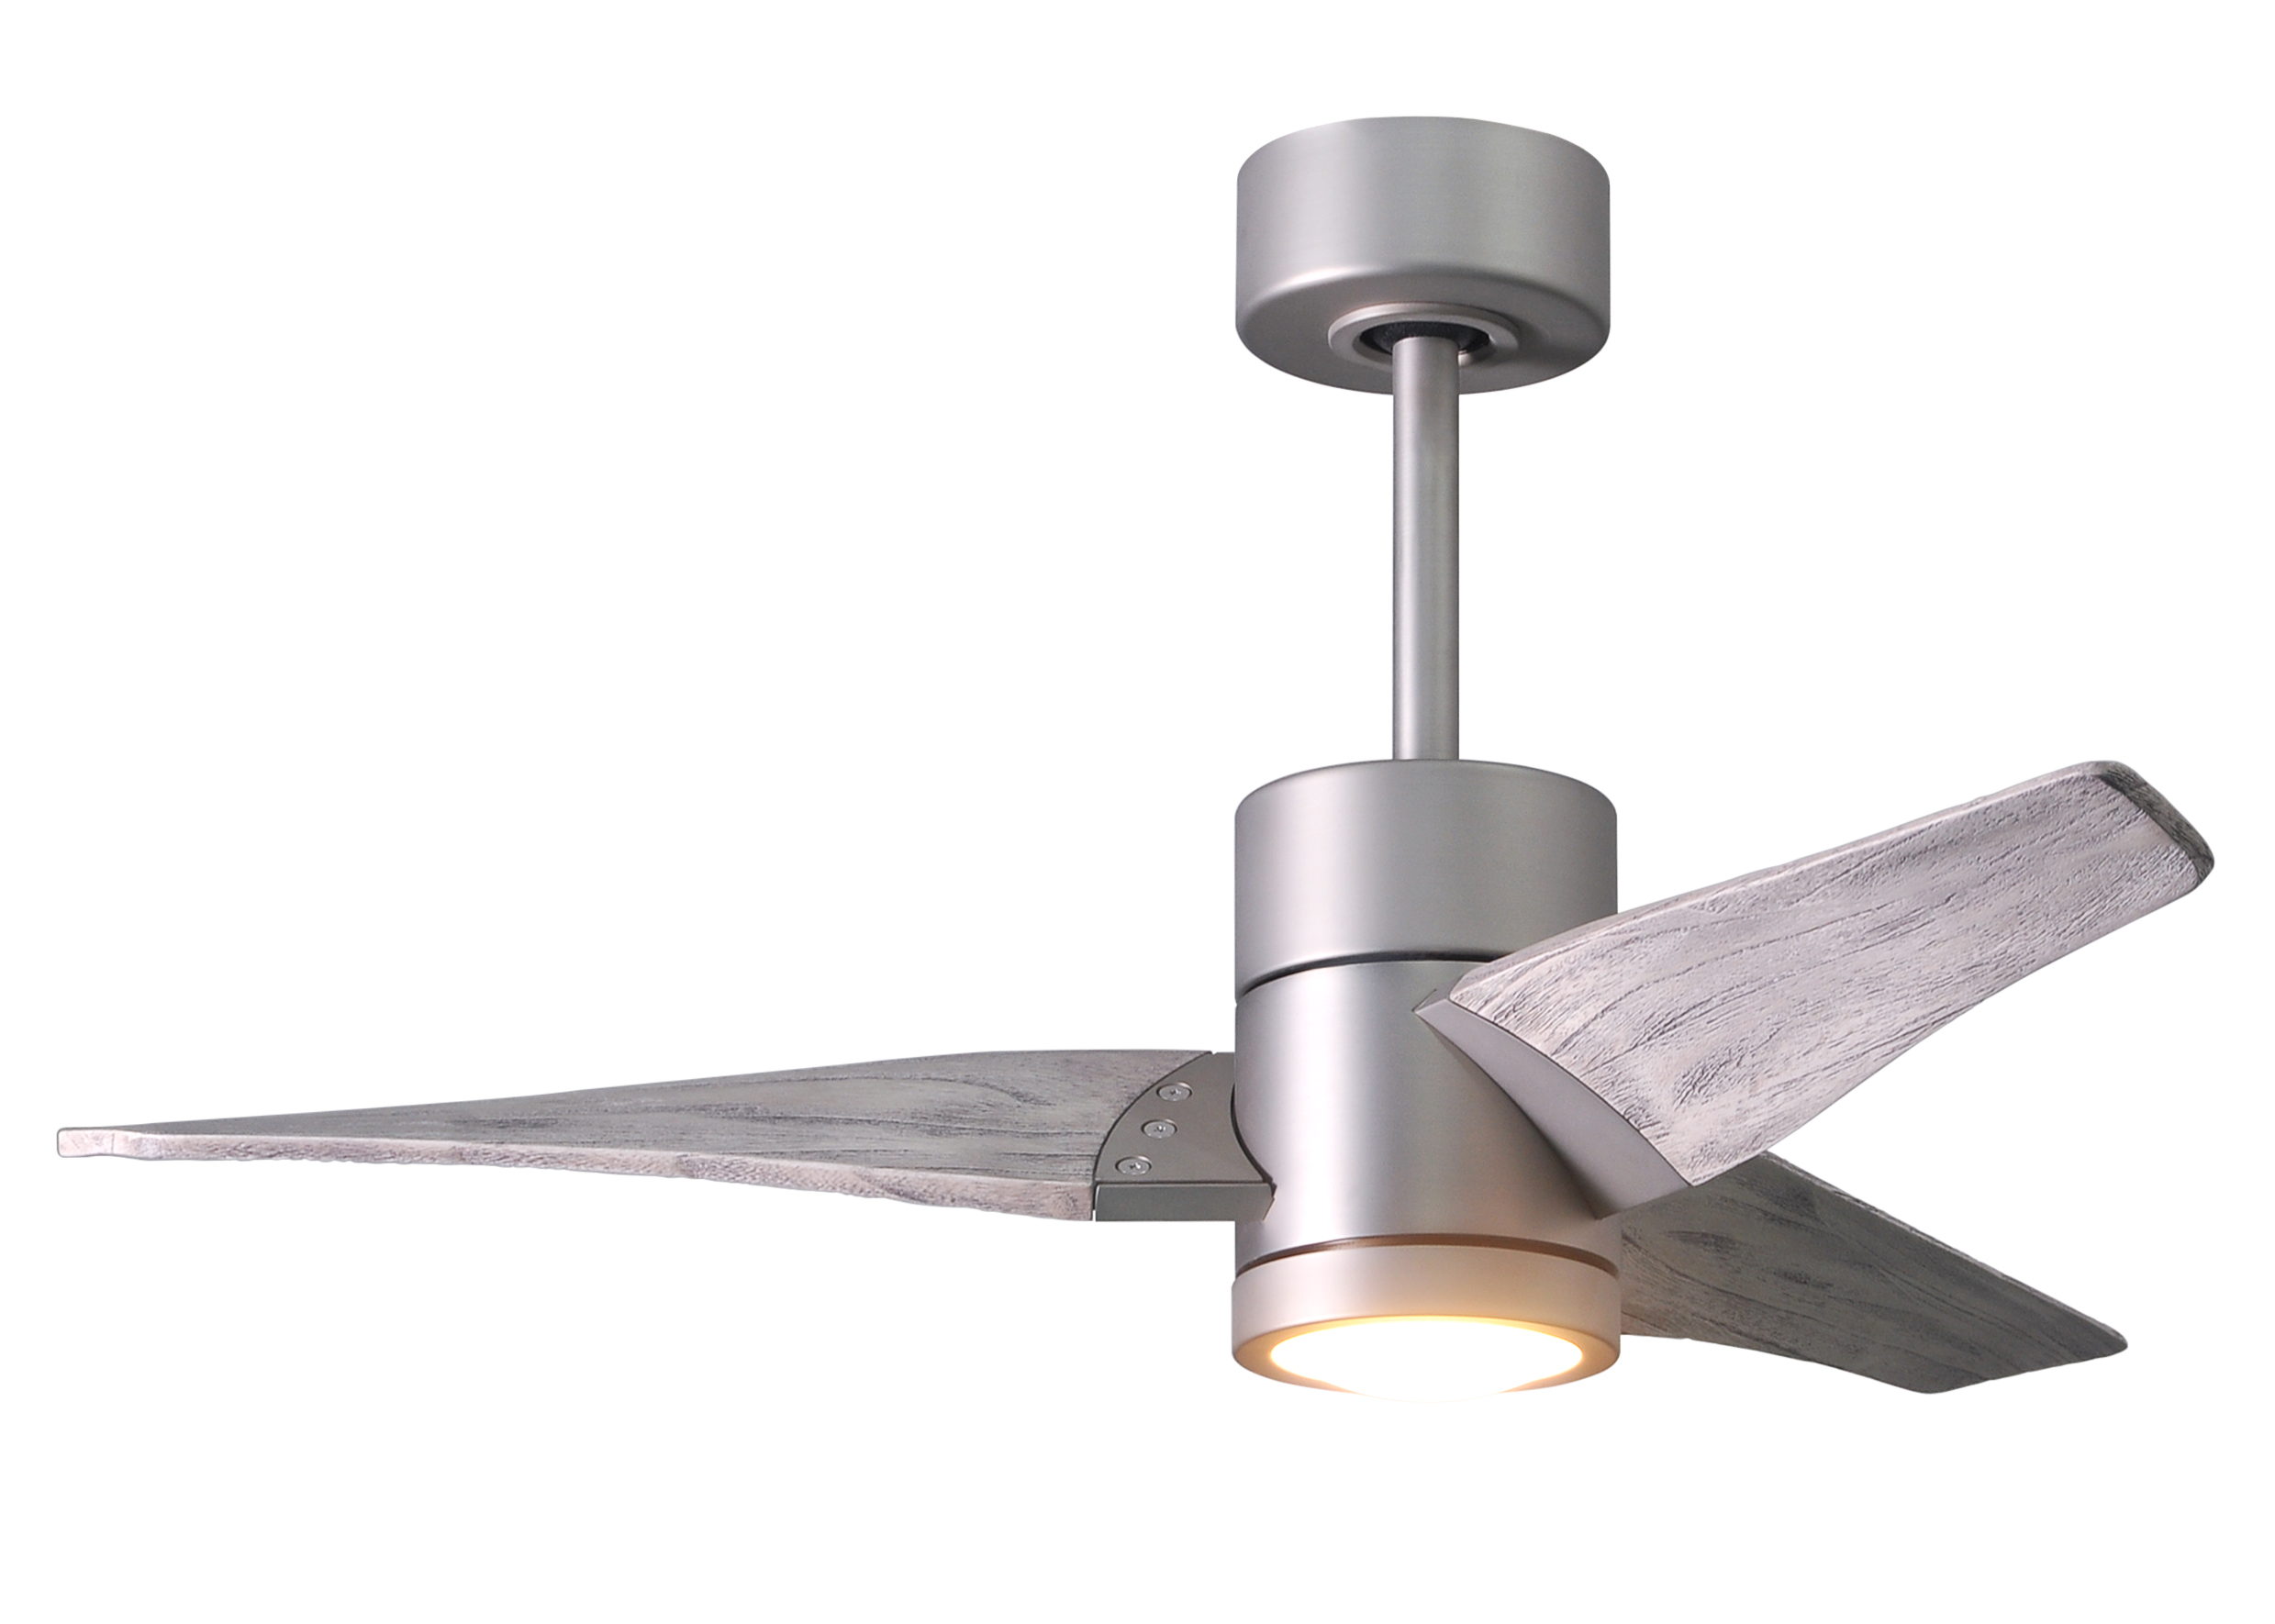 Super Janet Ceiling Fan in Brushed Nickel with 42” Barn Wood Blades